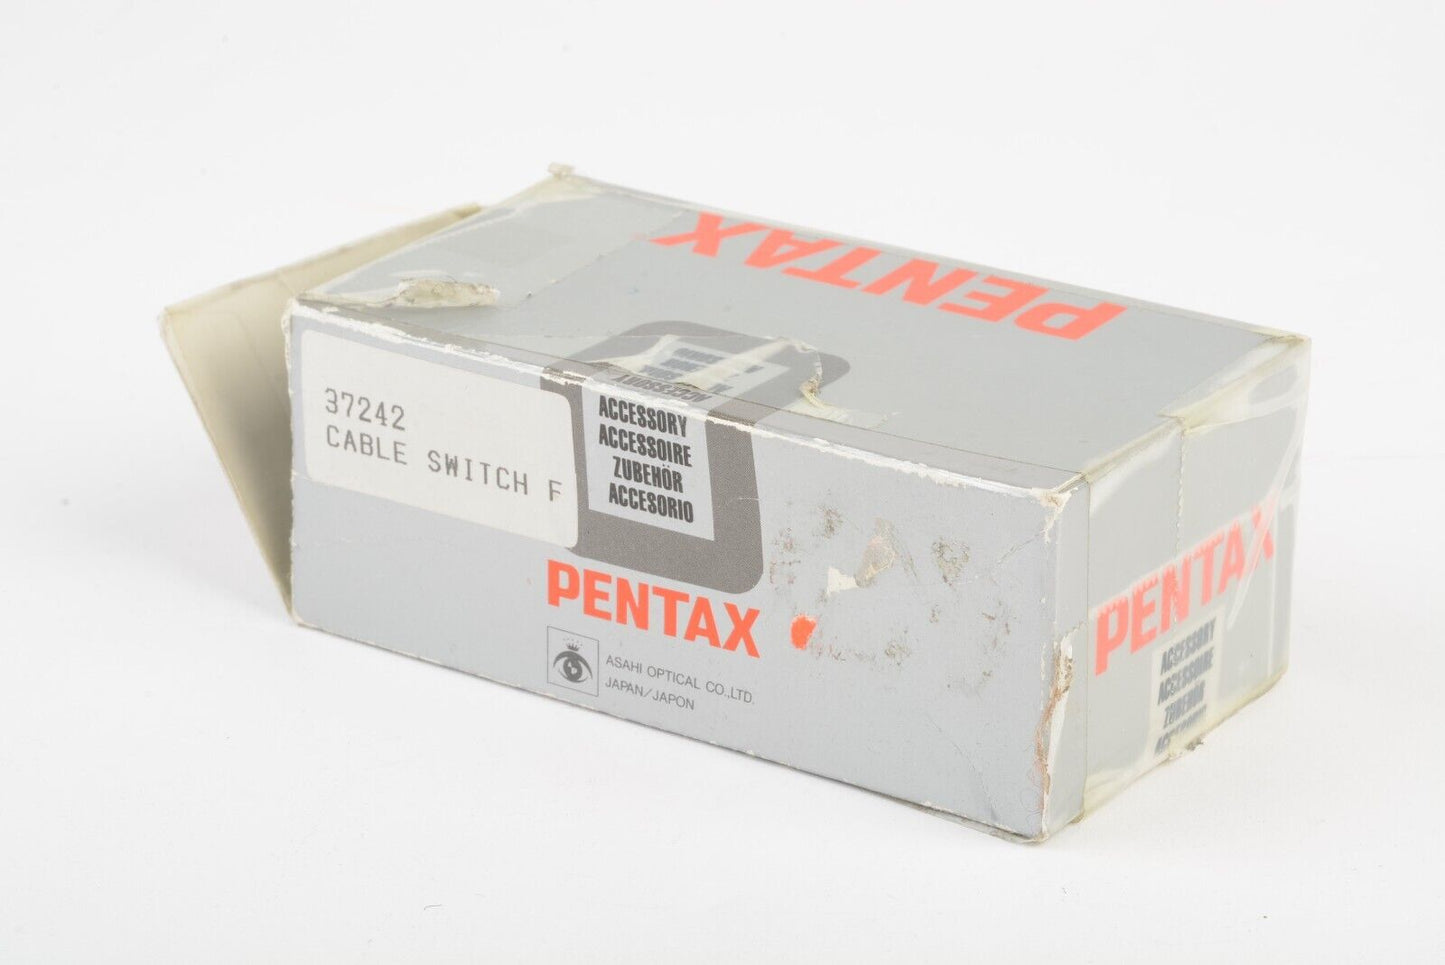 MINT- PENTAX CABLE SWITCH F FOR 645N PZ ZX & SF SERIES CAMERAS 37242 F/S